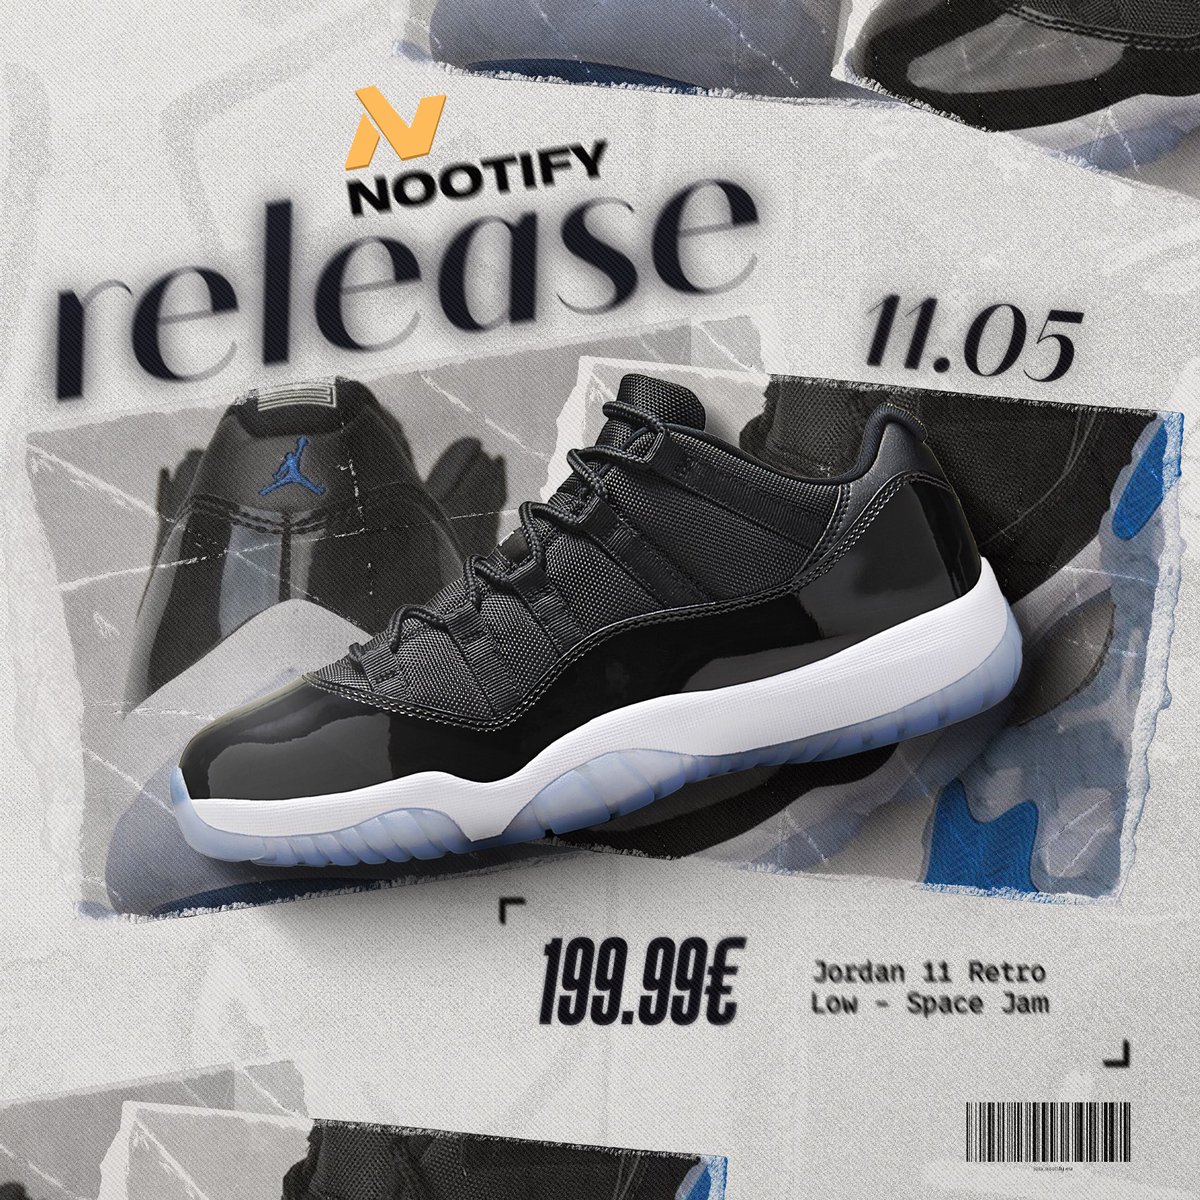 Jordan 11 Low 'Space Jam' Release! Confirmed for 11/05/2024 Join us now for more waitlist.nootify.eu